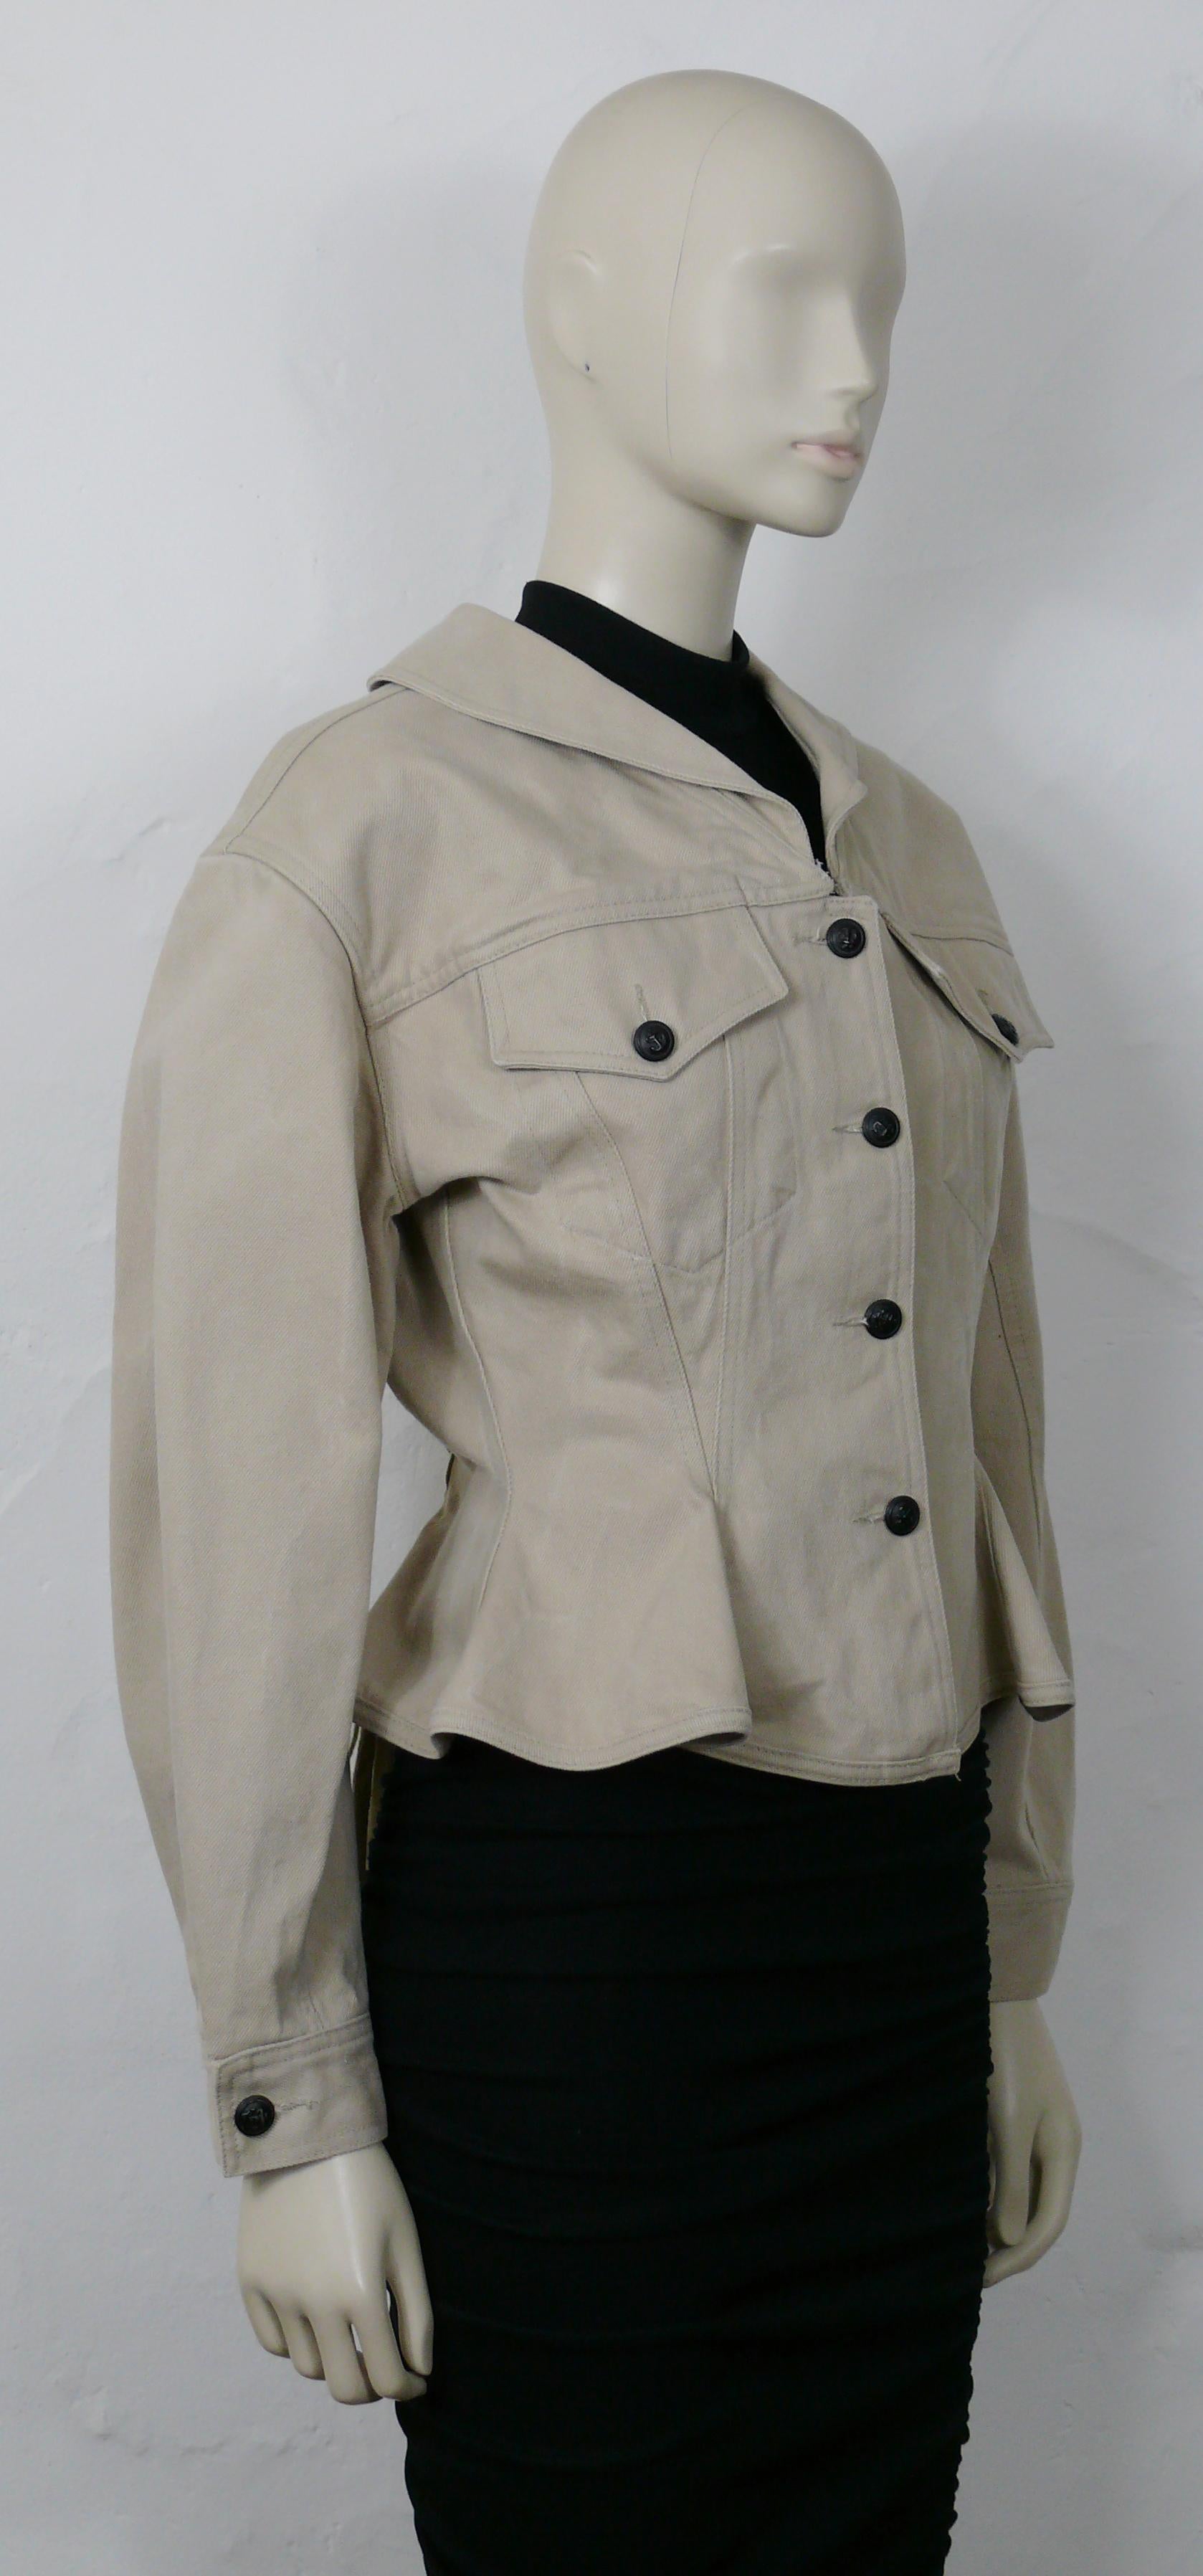 JEAN PAUL GAULTIER Junior vintage beige denim peplum jacket laced in the back

This jacket features :
- Beige denim fabric.
- Sailor collar.
- Front button down fastening.
- Back lace up detail.
- Peplum waist.
- Long sleeves with cuff buttoning.
-